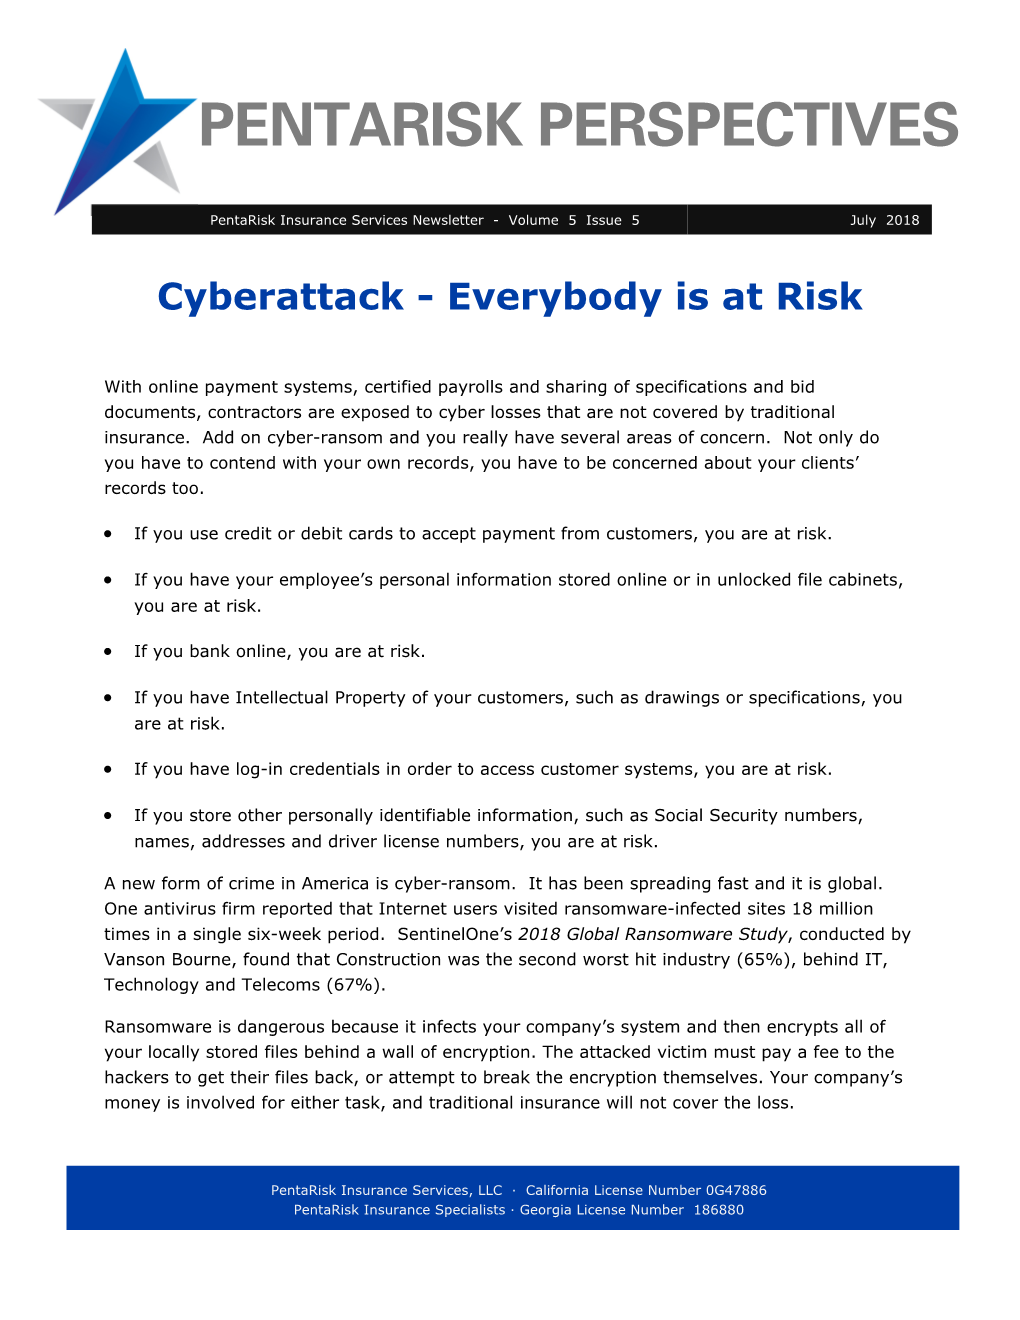 Cyberattack - Everybody Is at Risk